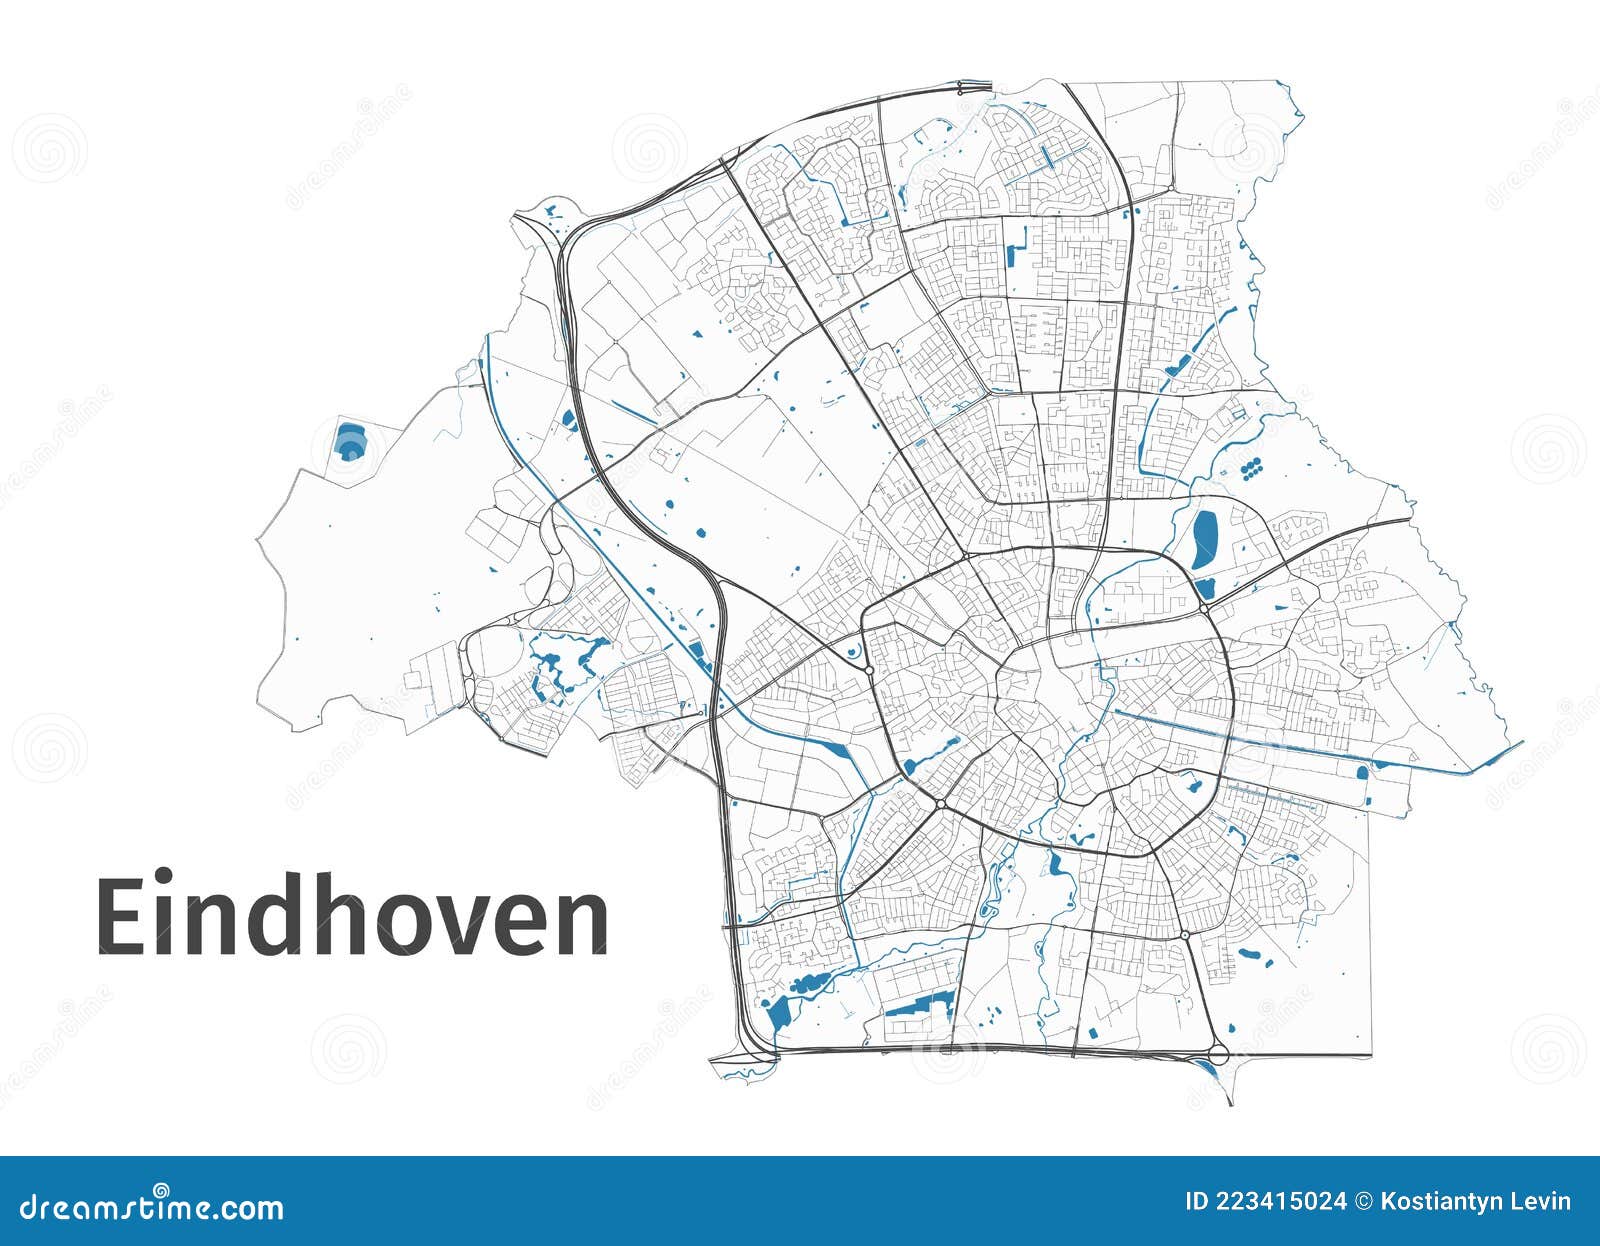 Eindhoven Map. Detailed Map Of Eindhoven City Administrative Area ...